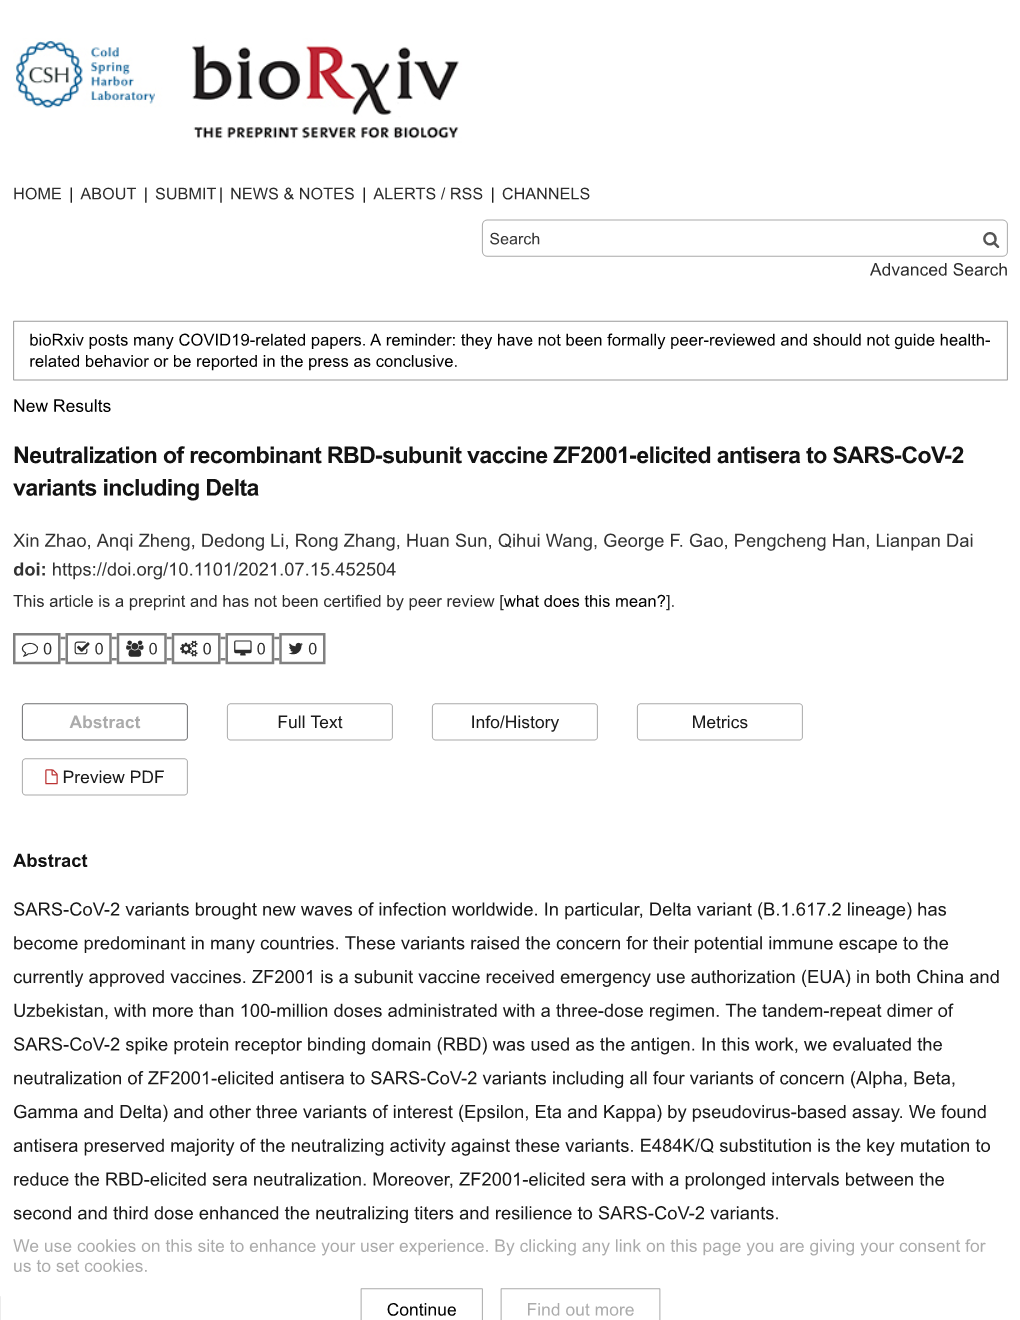 Neutralization of Recombinant RBD-Subunit Vaccine ZF2001-Elicited Antisera to SARS-Cov-2 Variants Including Delta